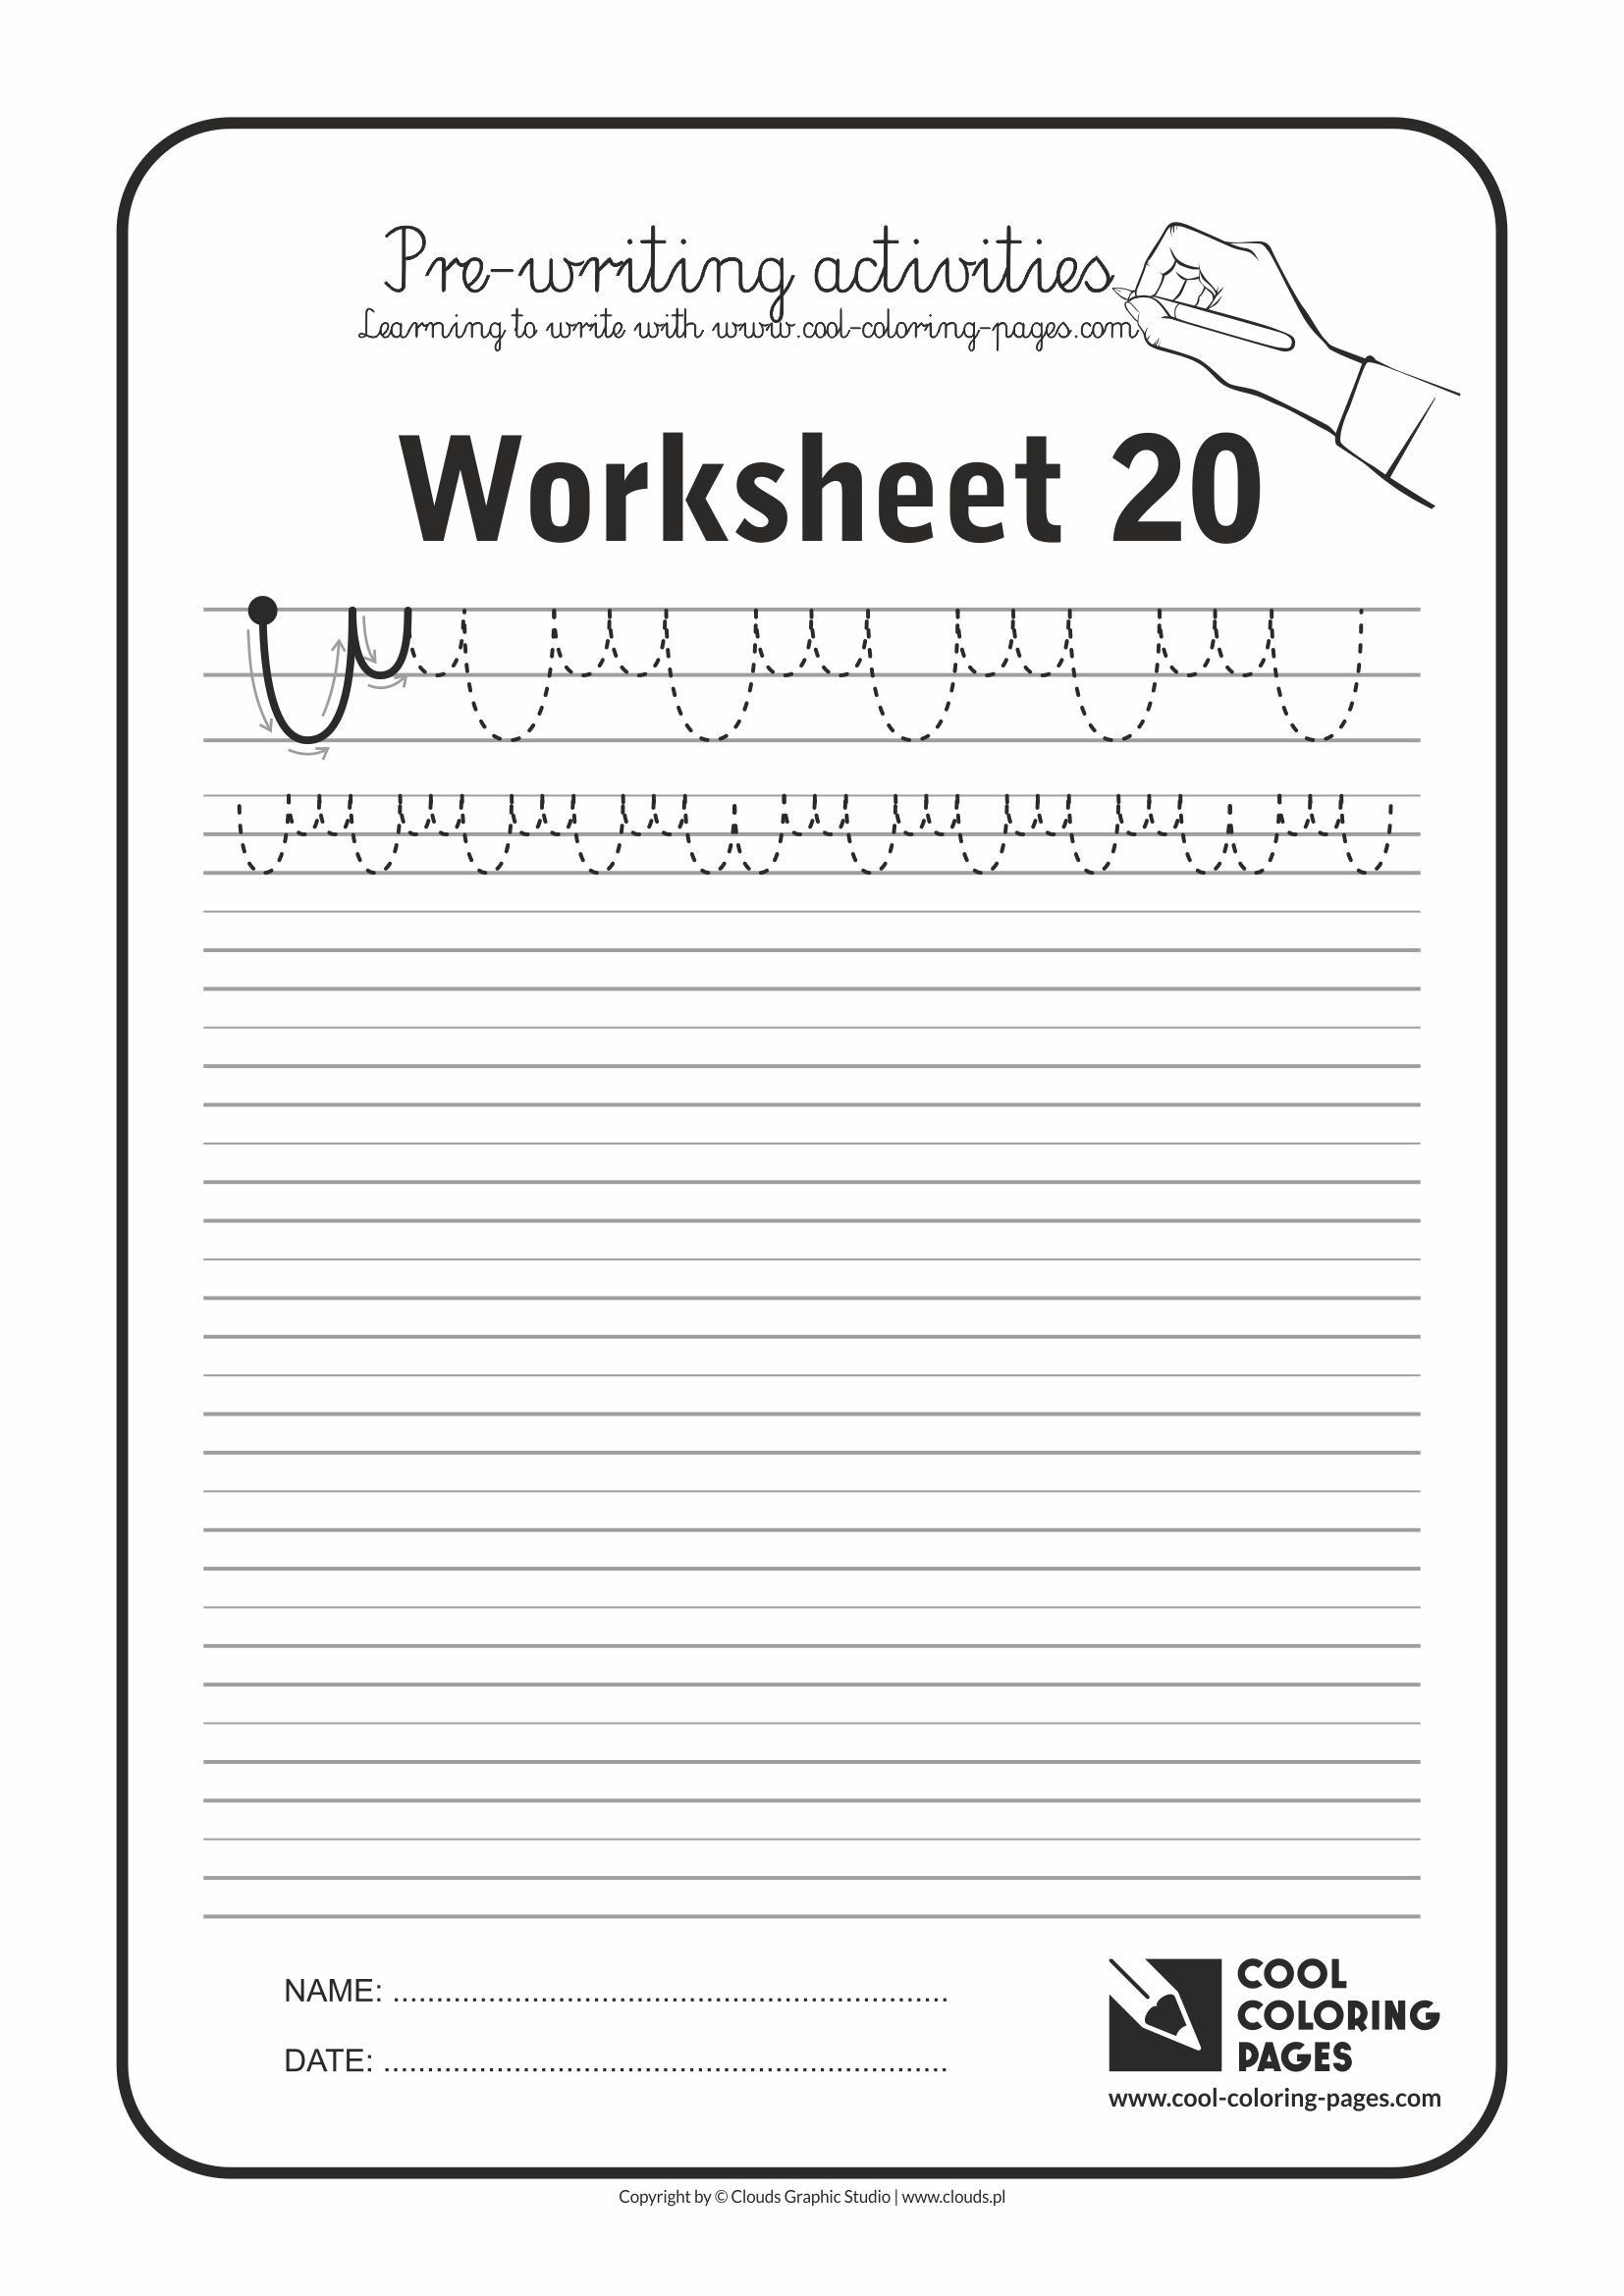 Cool Coloring Pages / Pre-writing activities / Worksheet no.20